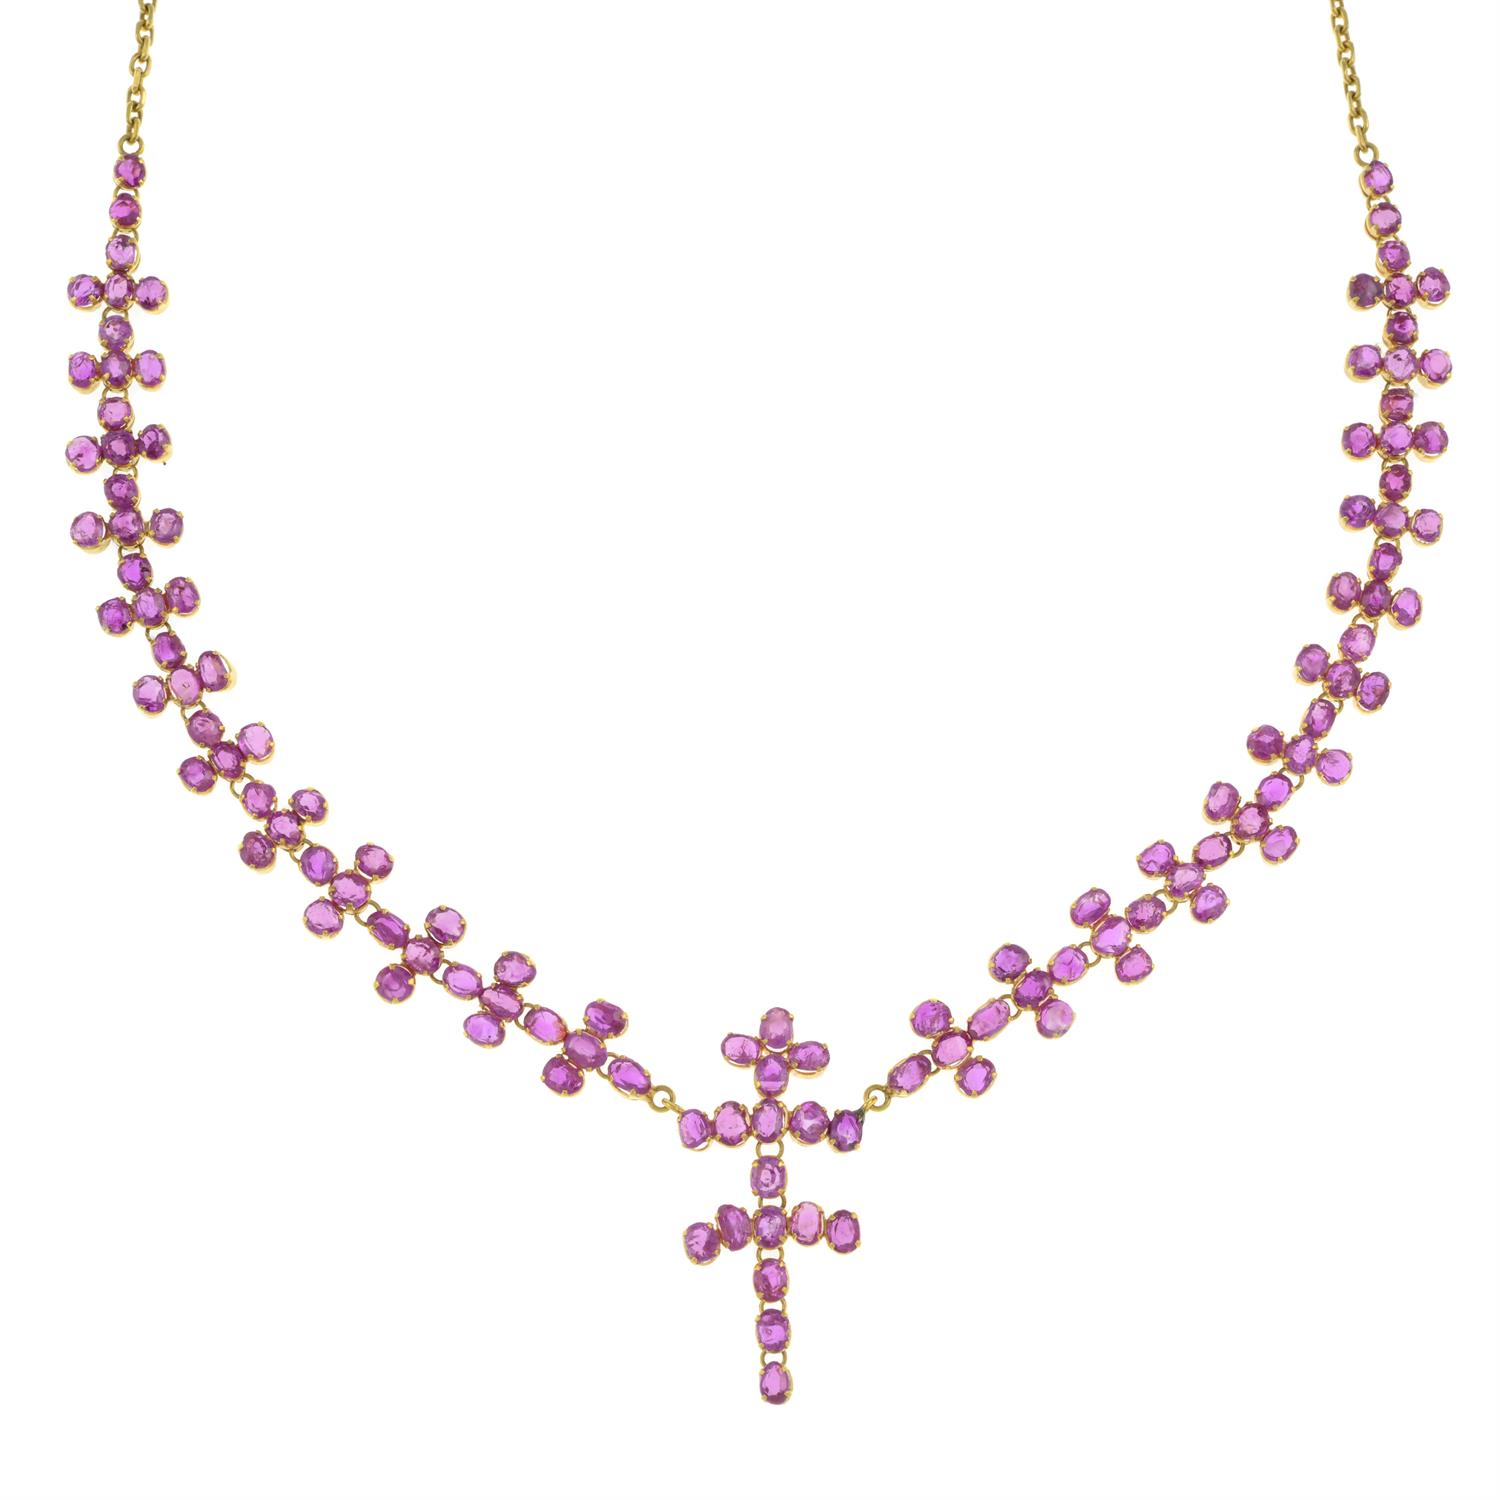 Pink sapphire necklace - Image 2 of 6